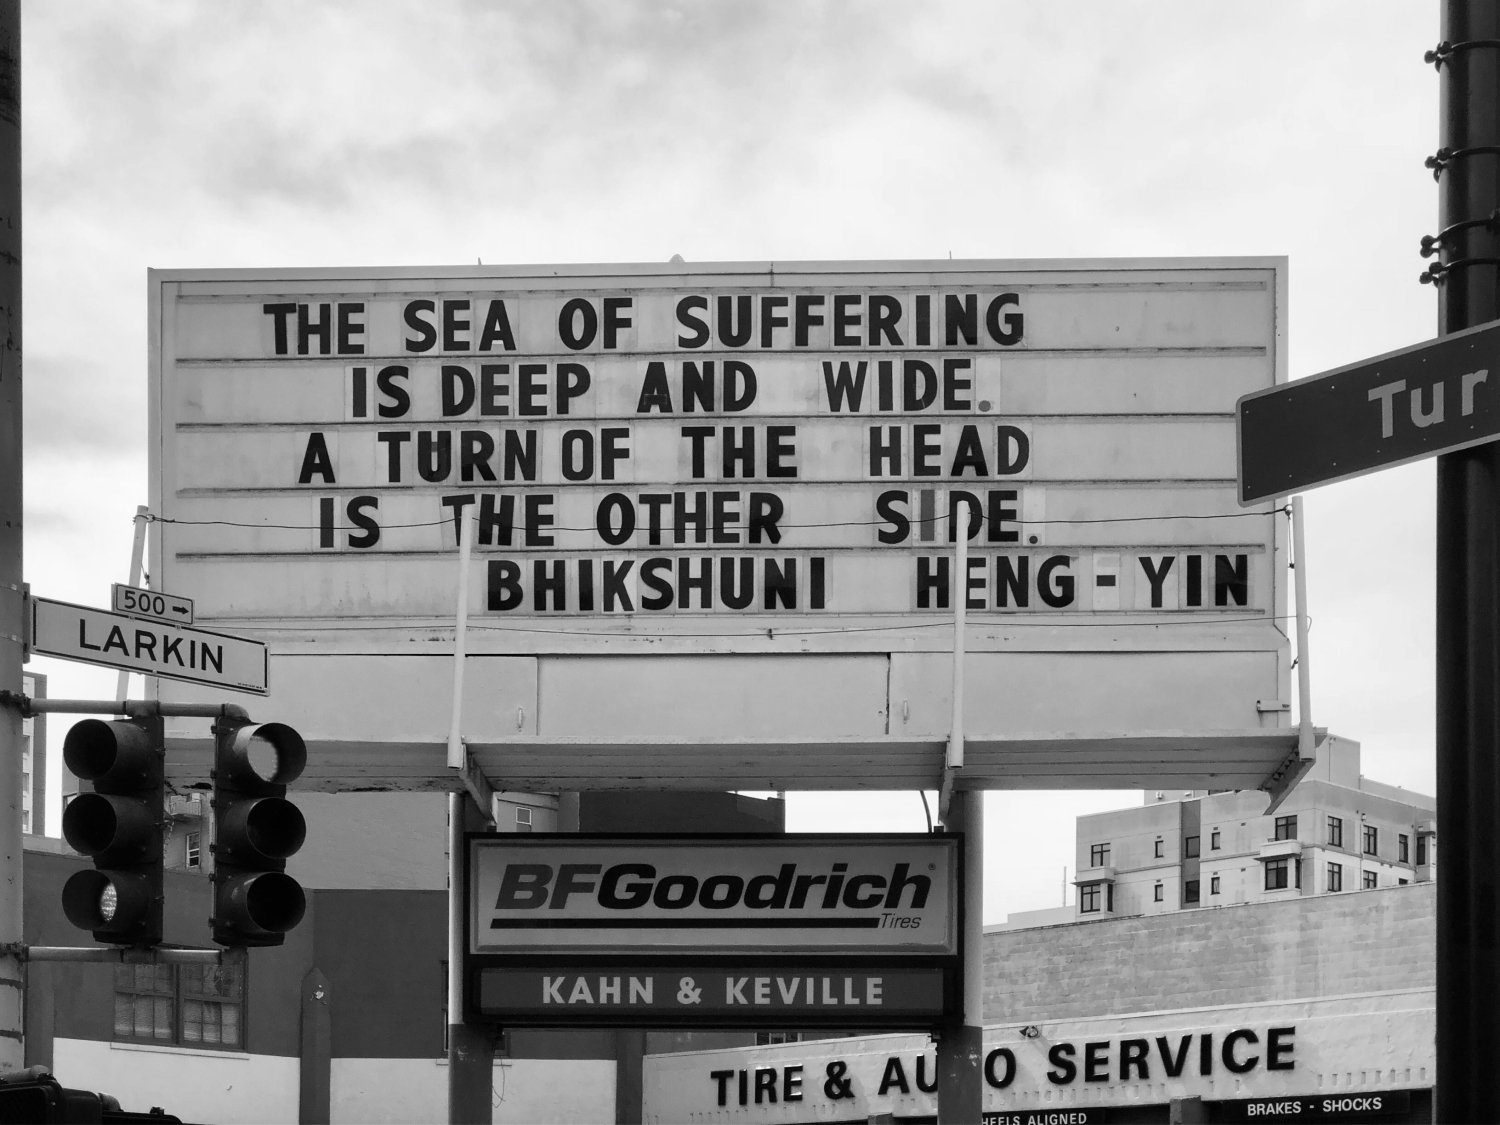 Sign at previous 555 Larkin location that states "The Sea of suffering is deep and wide. A turn of the head is the other side. - Bhikshuni Heng-Yin"